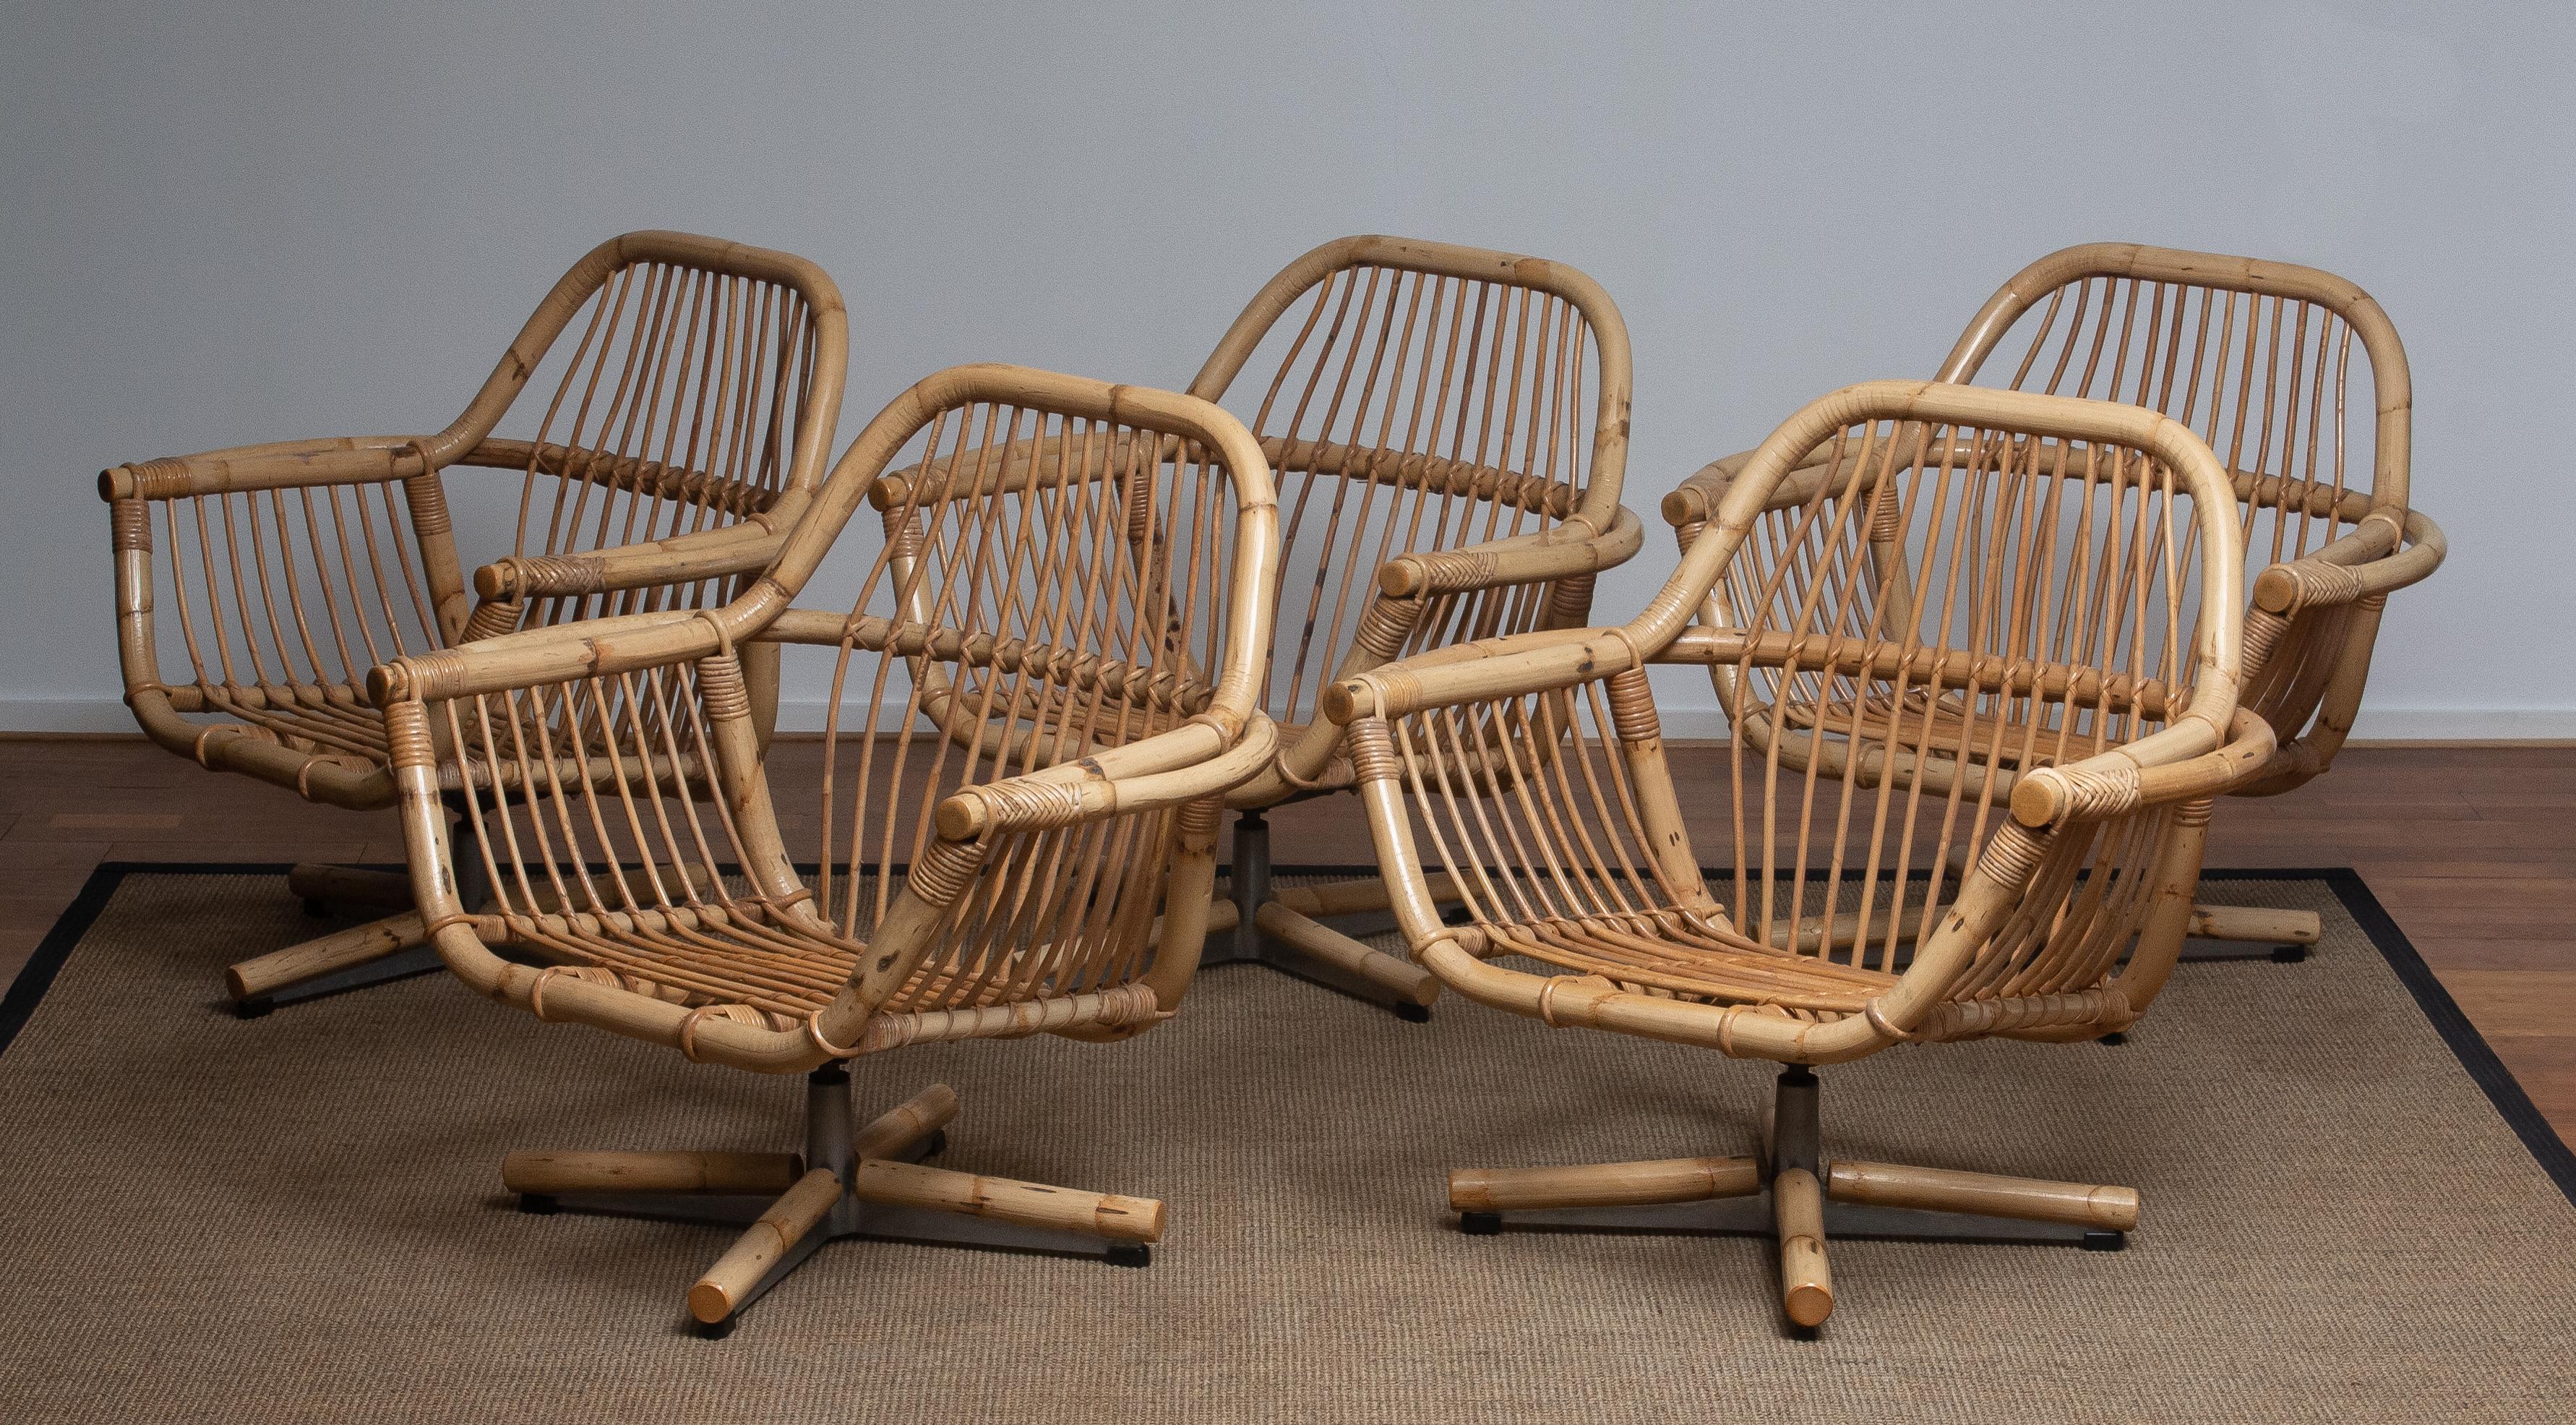 Extremely beautiful and rare Scandinavian garden set / lounge set consisting five rattan swivel chairs (on an aluminum stand) and one coffee table all in original and good condition.
Made in Sweden in the 1960s.
Sizes of the five chairs are for